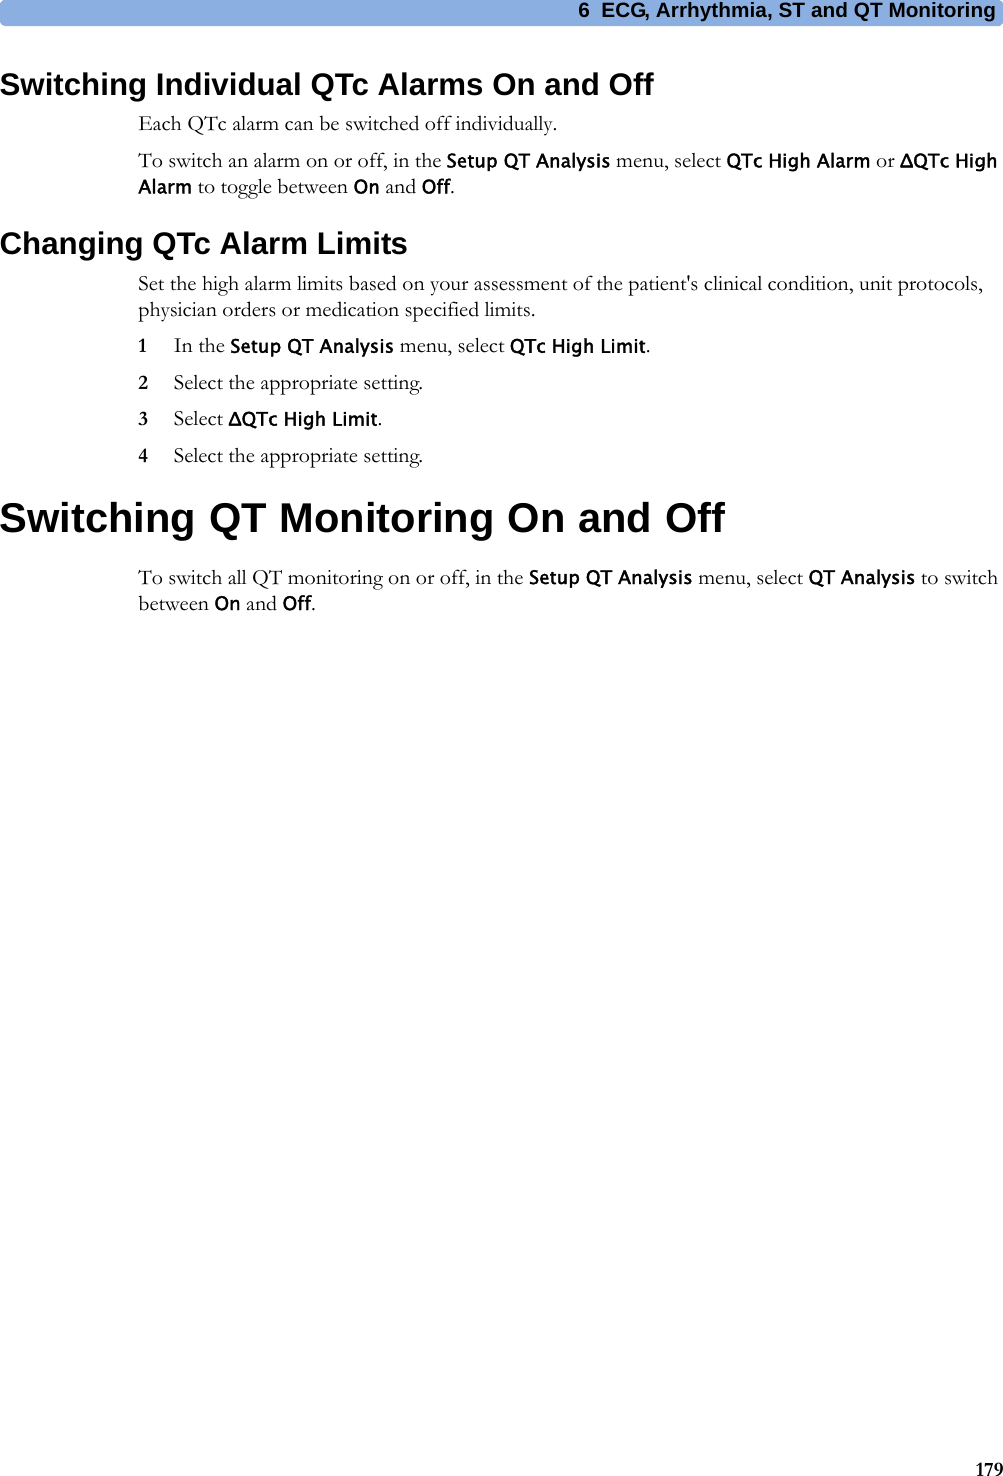 6 ECG, Arrhythmia, ST and QT Monitoring179Switching Individual QTc Alarms On and OffEach QTc alarm can be switched off individually.To switch an alarm on or off, in the Setup QT Analysis menu, select QTc High Alarm or ΔQTc High Alarm to toggle between On and Off.Changing QTc Alarm LimitsSet the high alarm limits based on your assessment of the patient&apos;s clinical condition, unit protocols, physician orders or medication specified limits.1In the Setup QT Analysis menu, select QTc High Limit.2Select the appropriate setting.3Select ΔQTc High Limit.4Select the appropriate setting.Switching QT Monitoring On and OffTo switch all QT monitoring on or off, in the Setup QT Analysis menu, select QT Analysis to switch between On and Off.